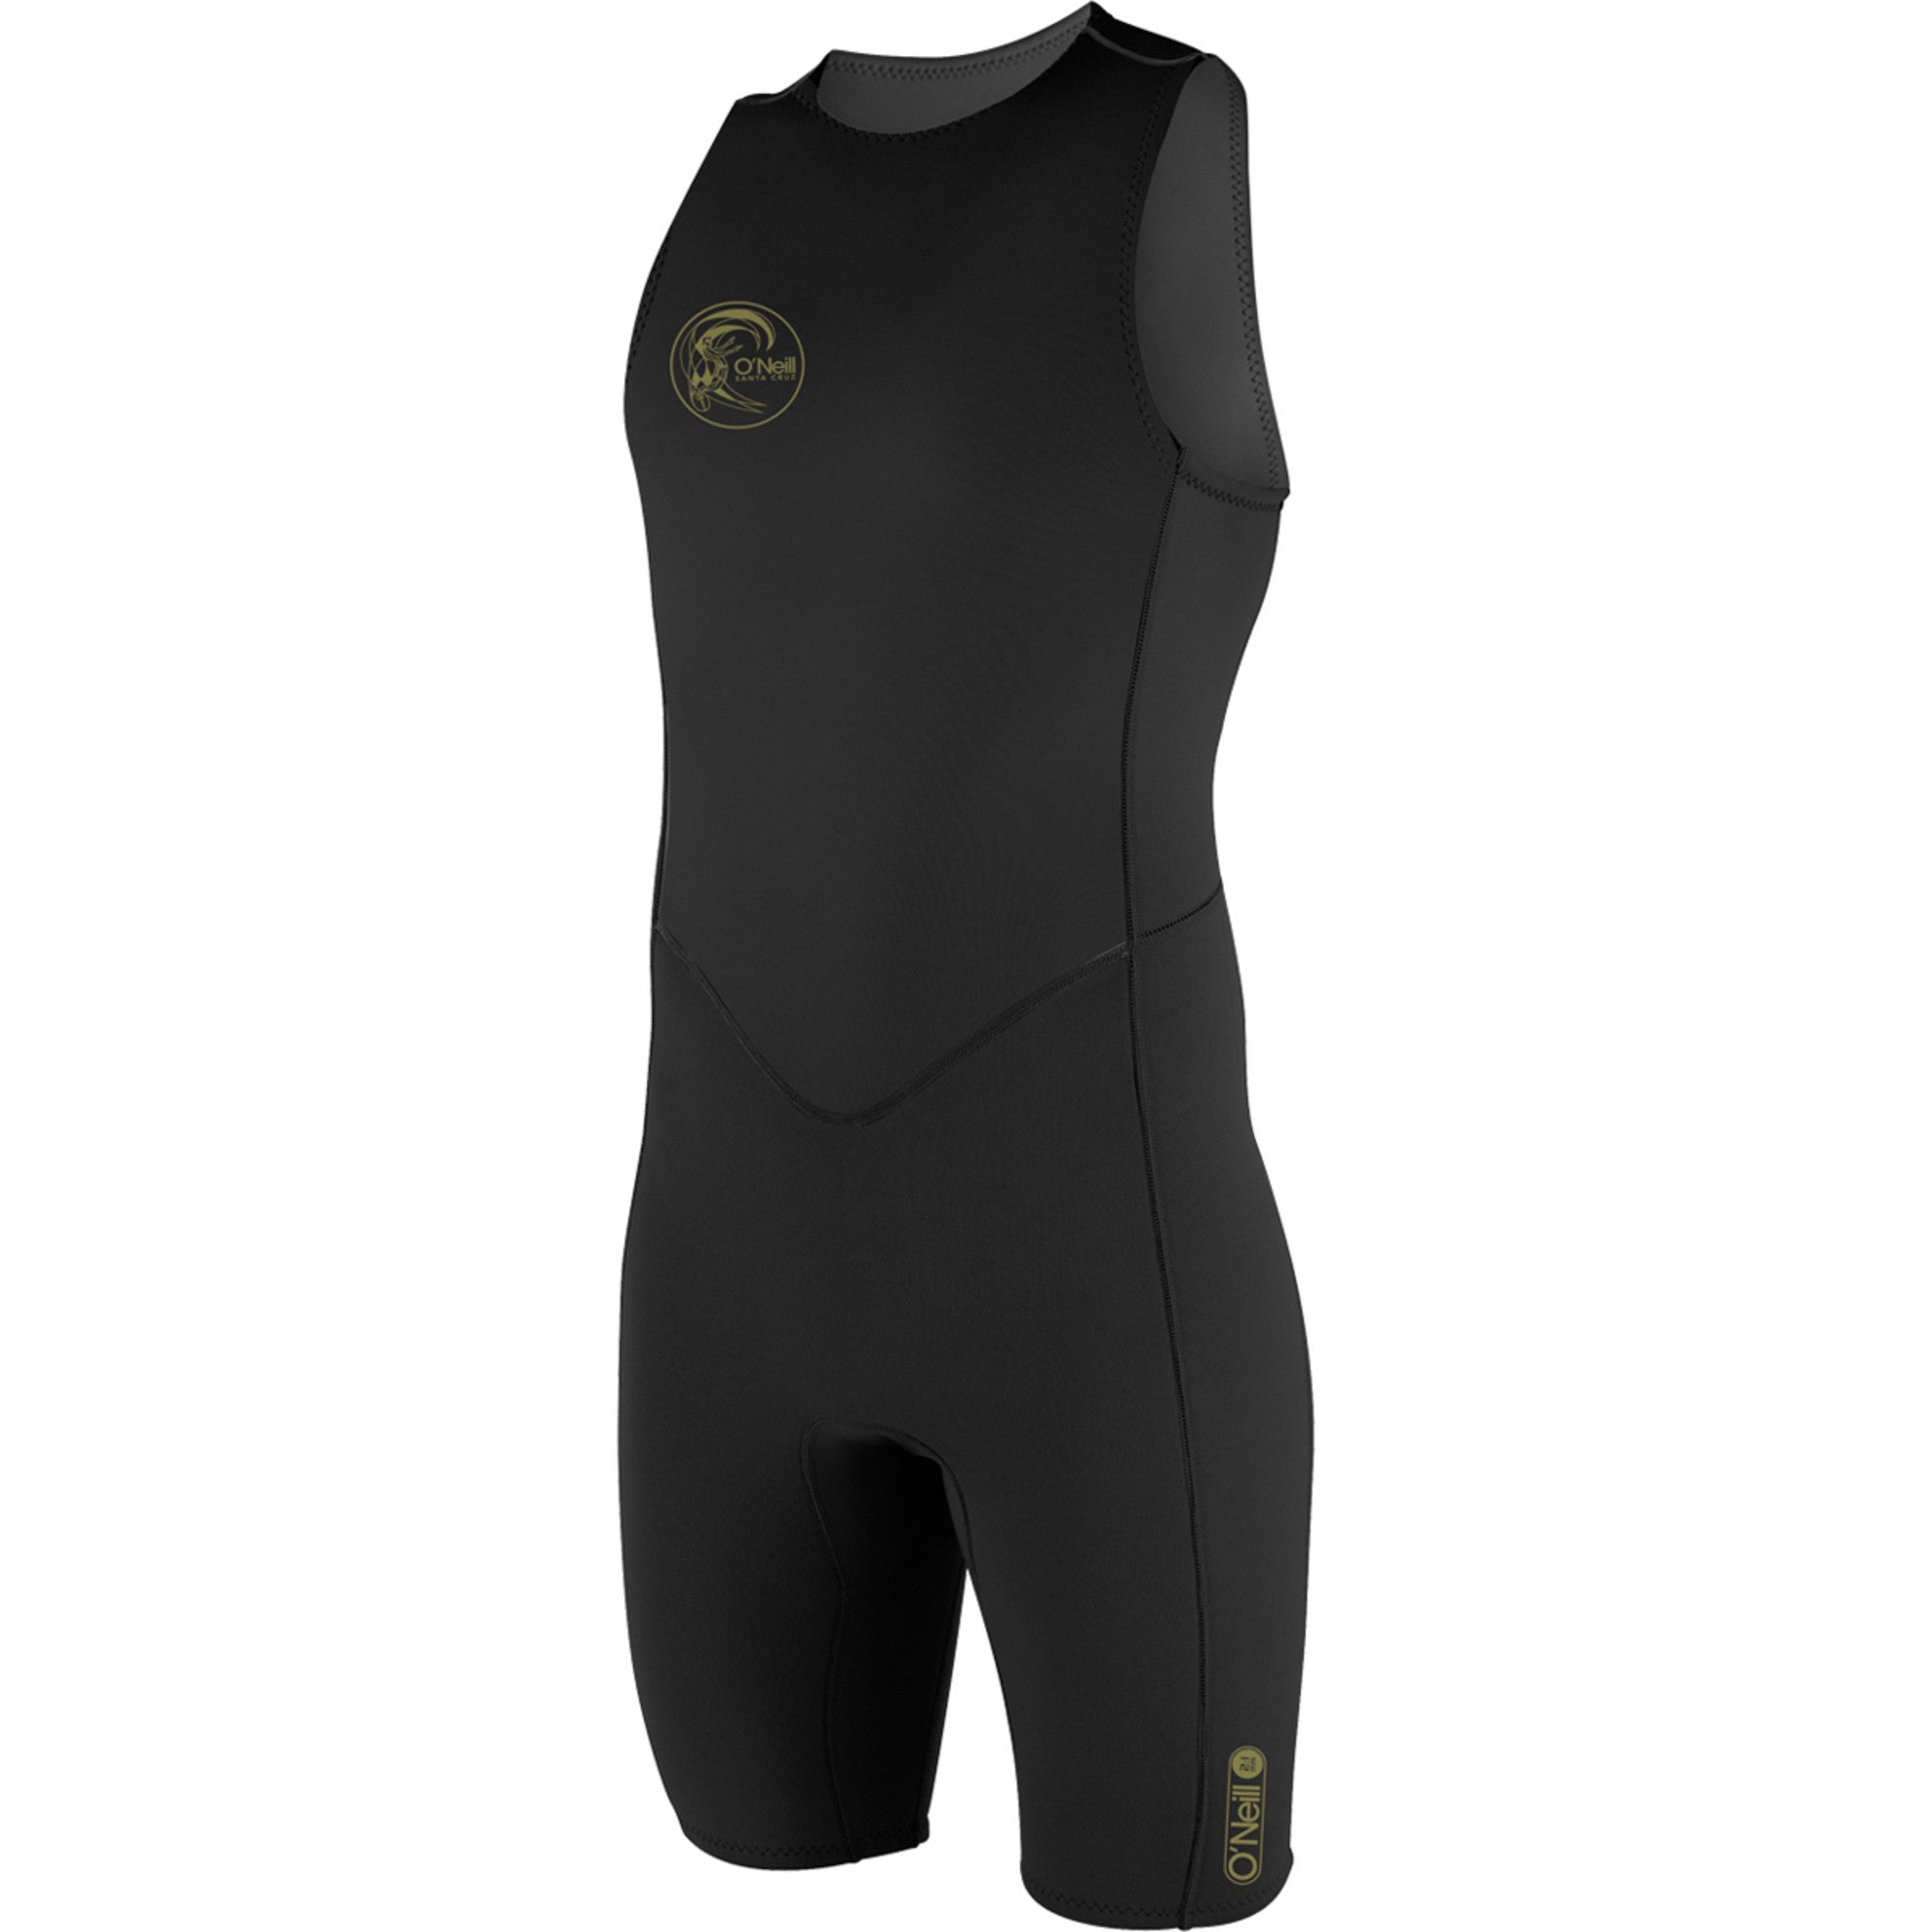 O’Neill Original 2mm Shorty - Worthing Watersports - 4529 - Wetsuits - O'Neill